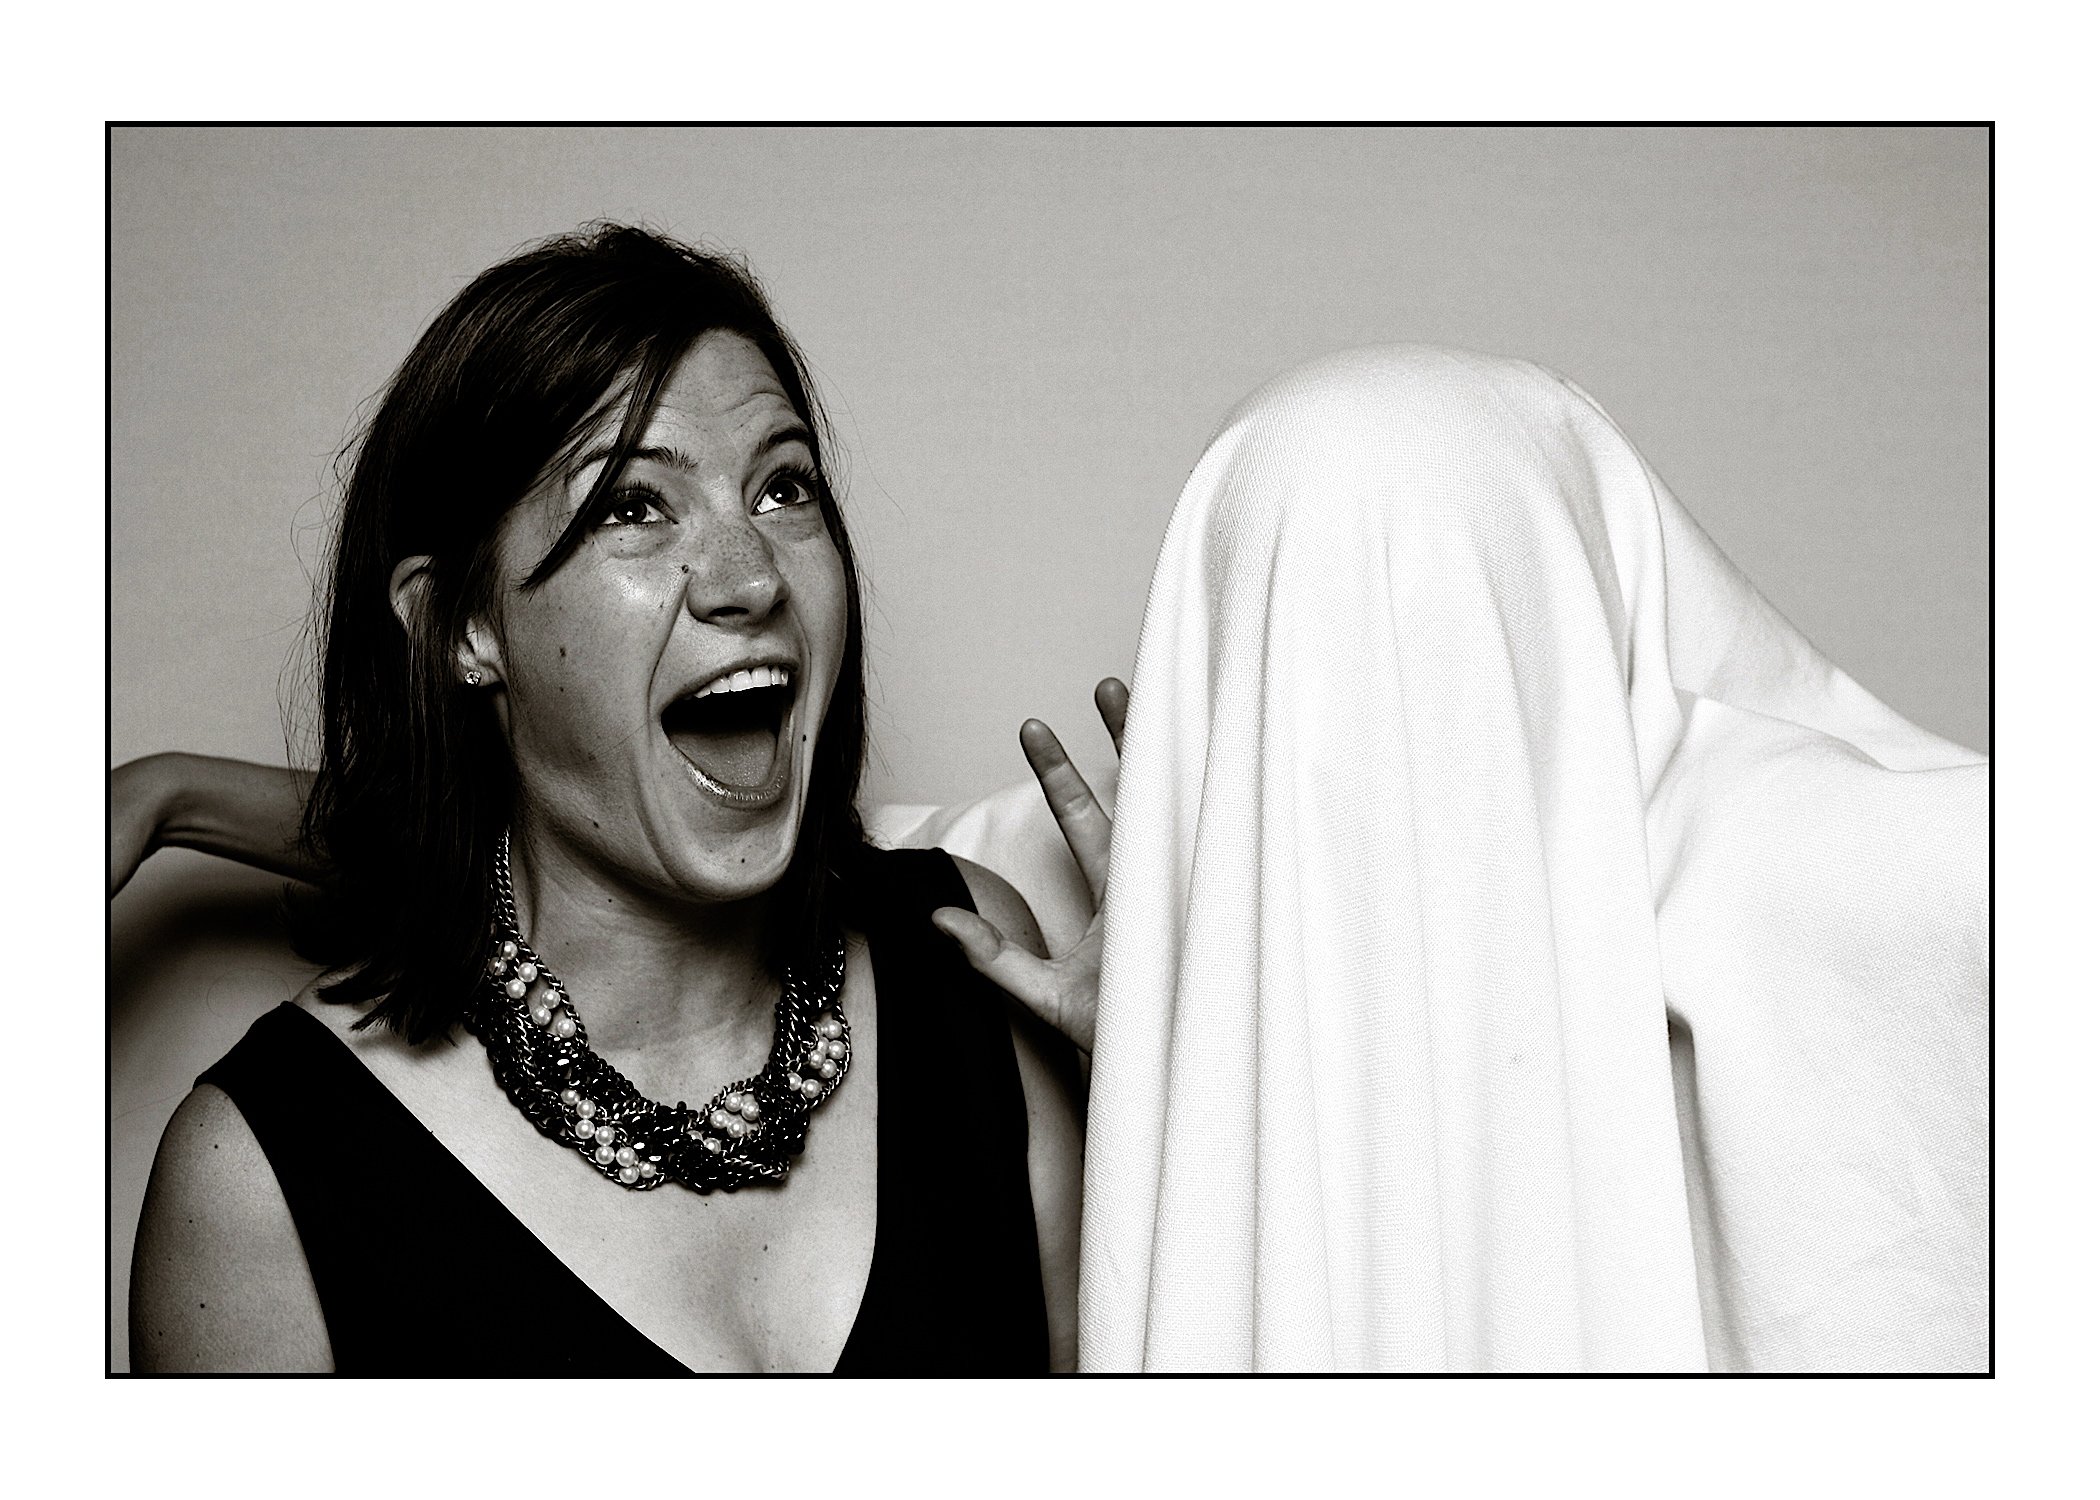 Liz Sower yelling and laughing at the same time, being attached by someone in a white bedsheet.